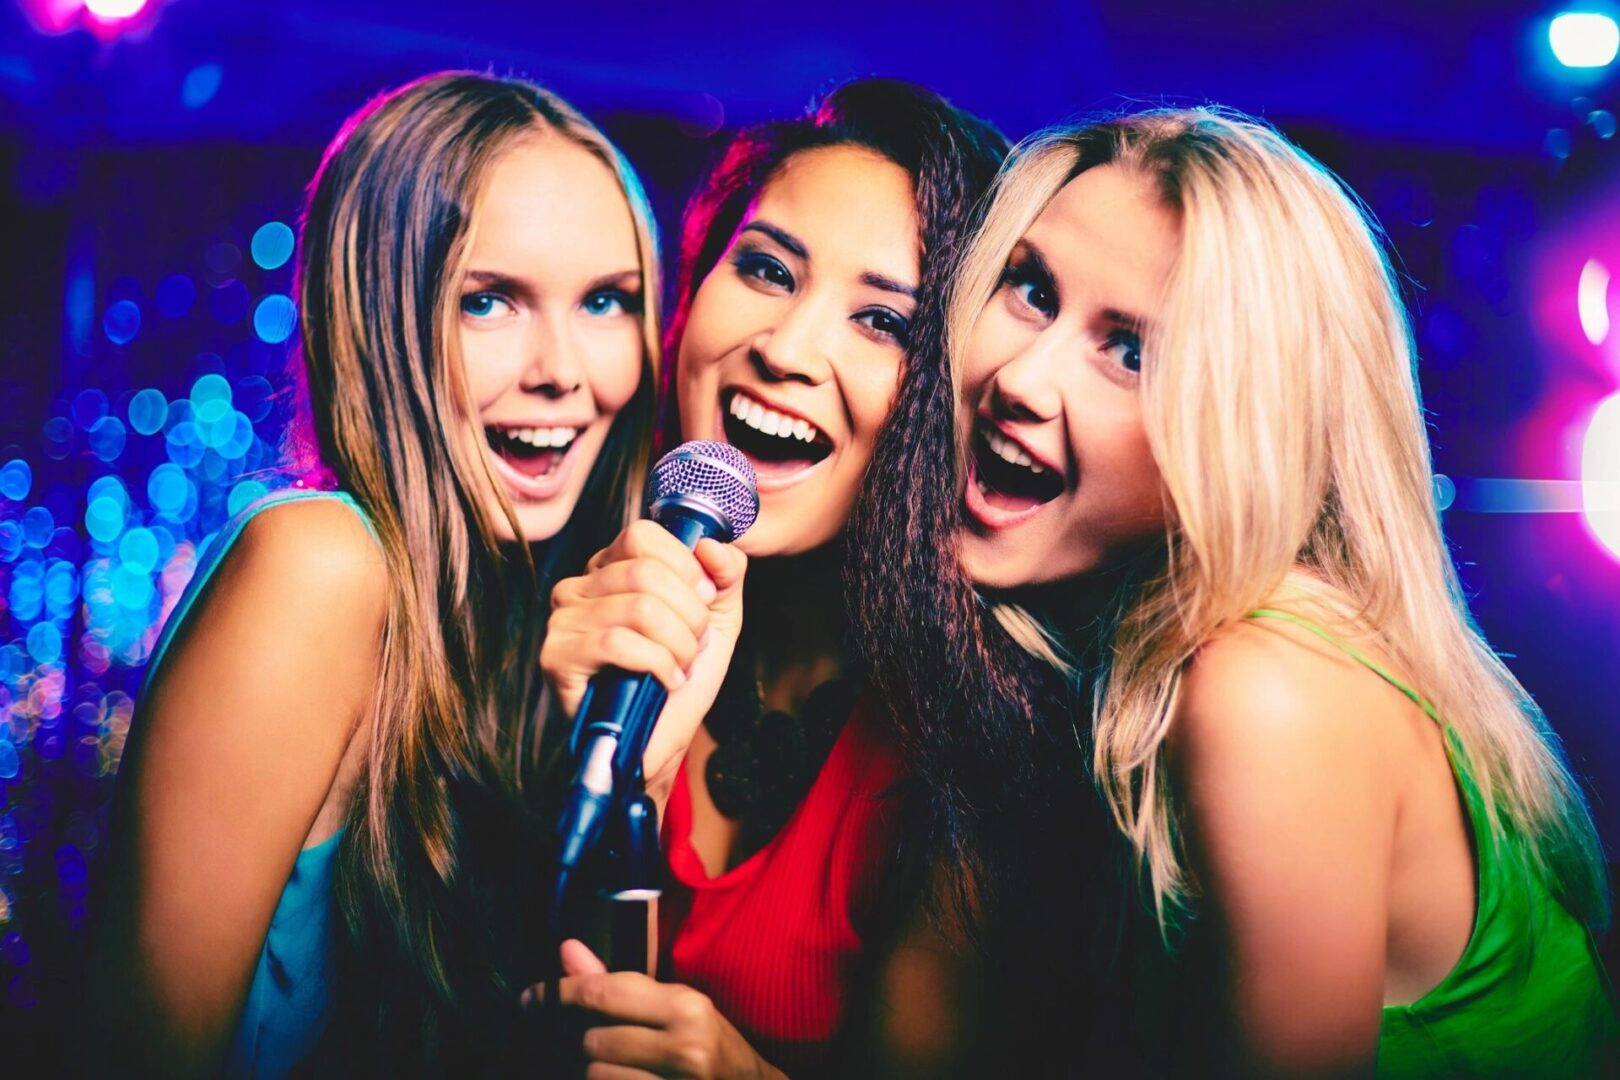 Three girls singing together on a song